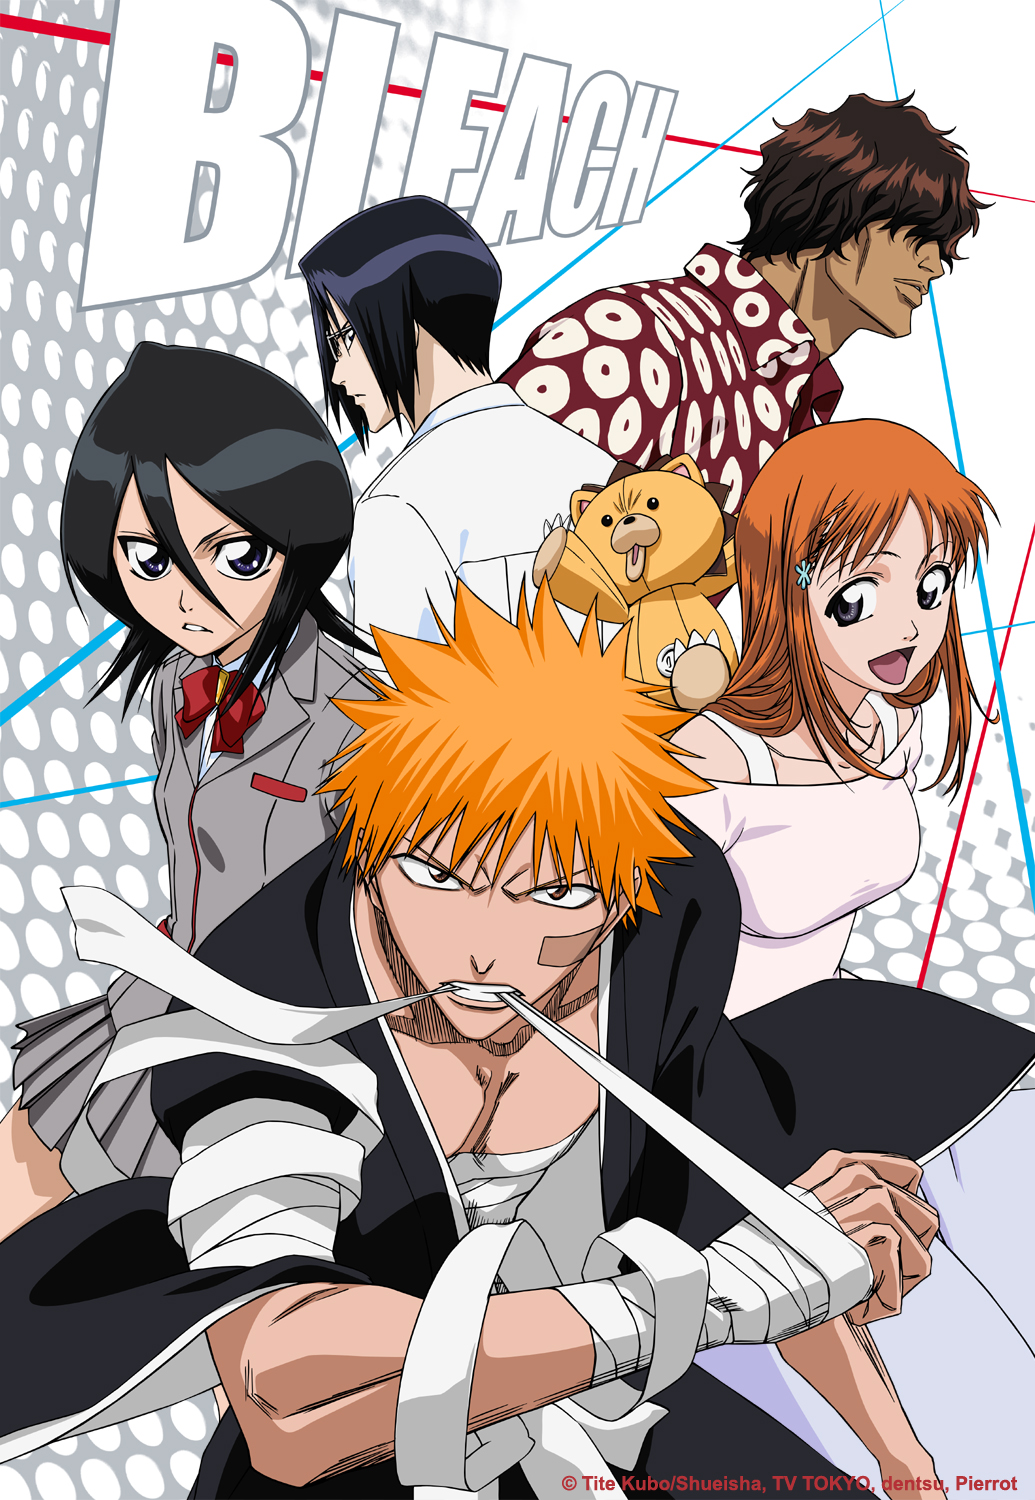 the meaning of bleach by ManOoOx on DeviantArt